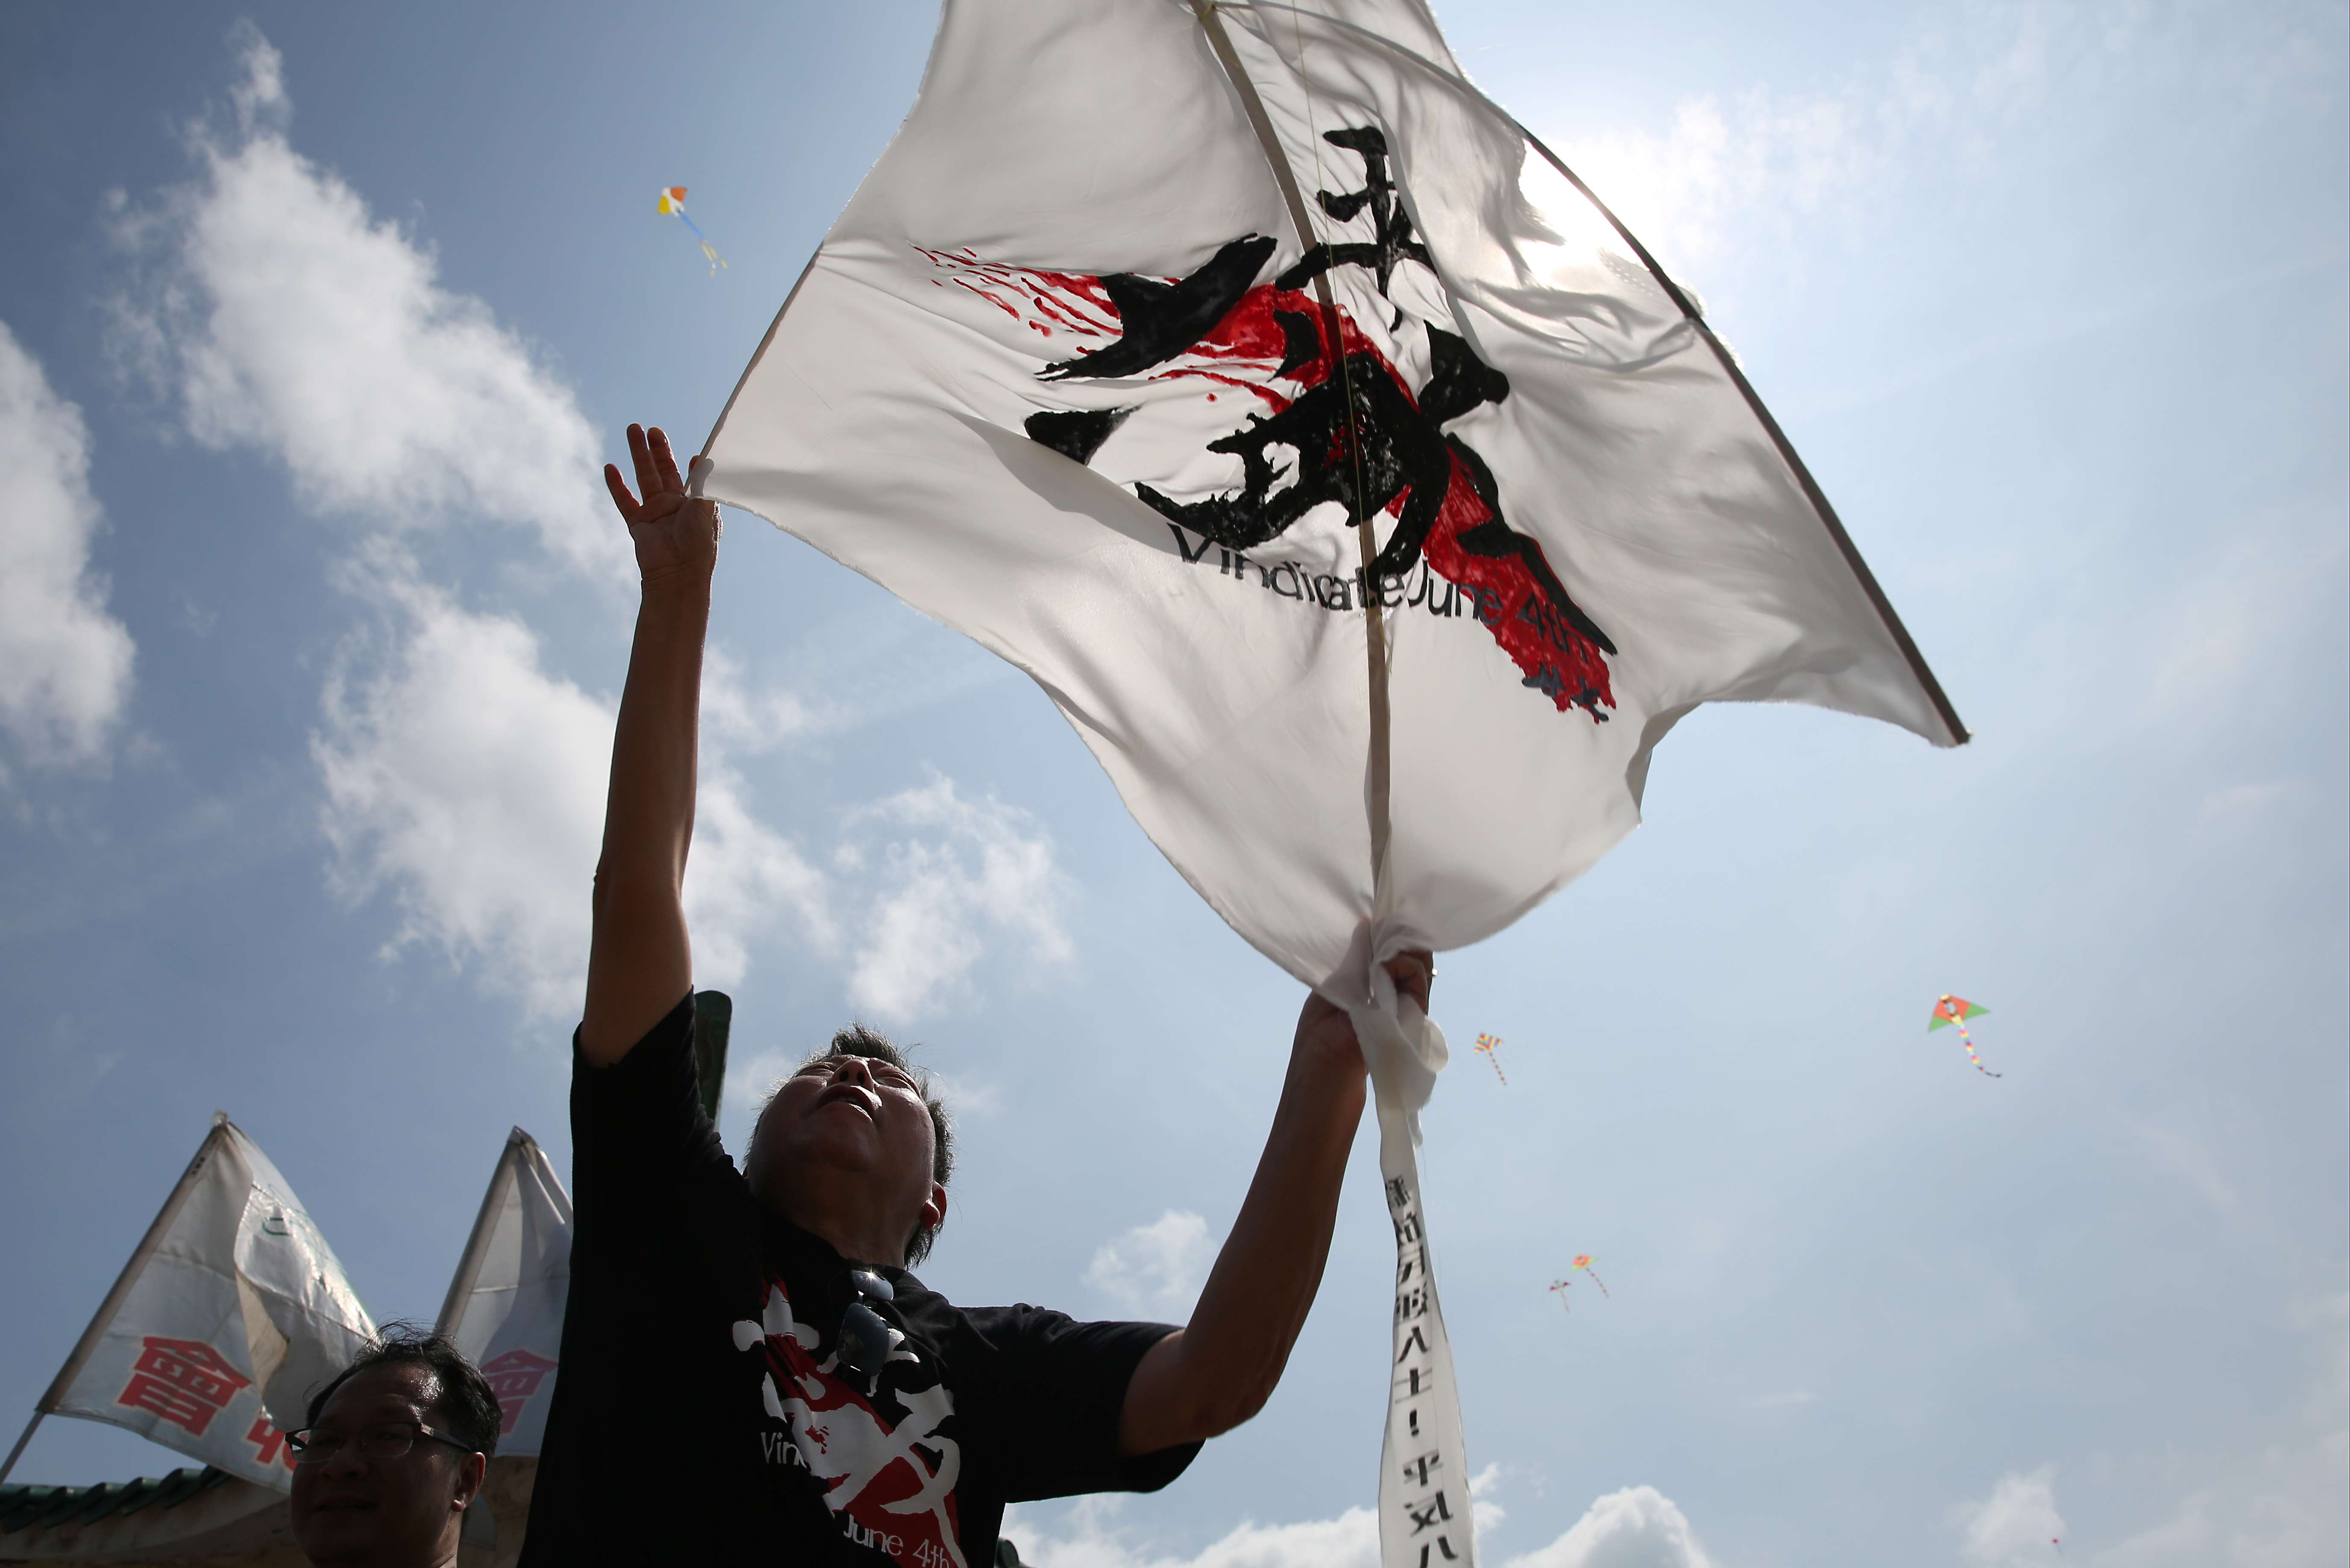 Members of the Hong Kong Alliance in Support of Patriotic Democratic Movements of China attend an event this month in the run-up to the 27th anniversary of the Tiananmen crackdown on June 4. Photo: Sam Tsang